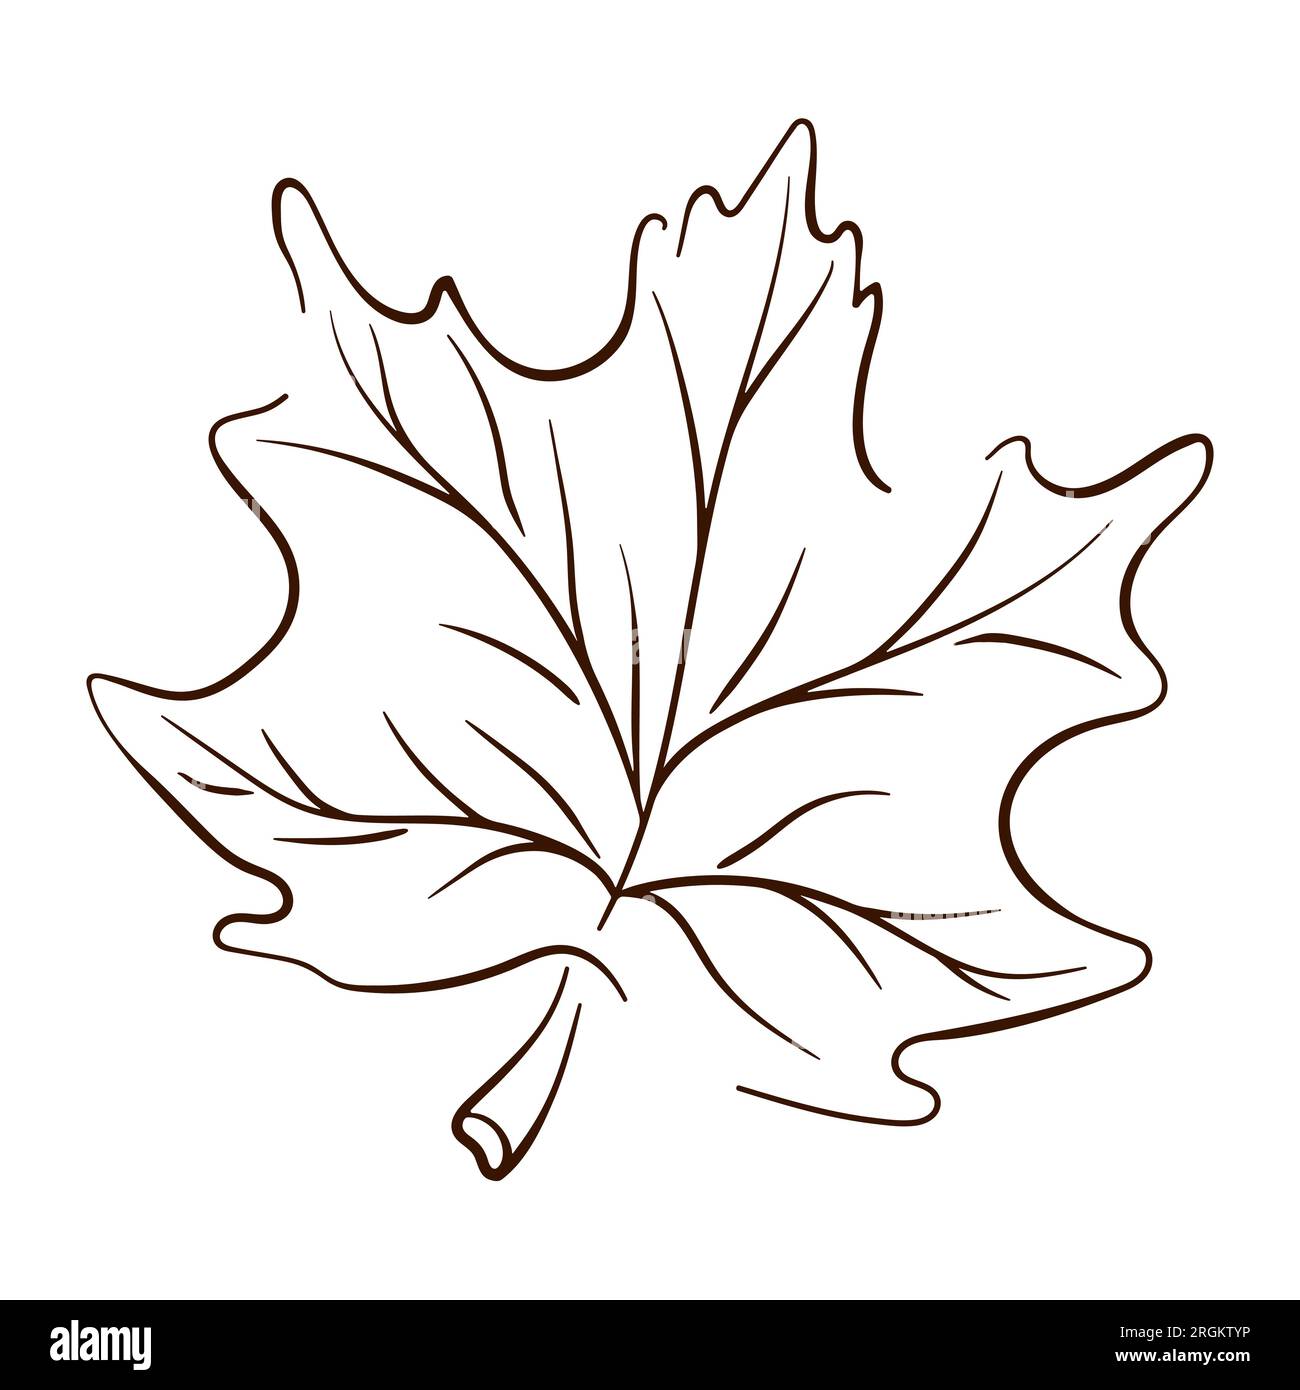 Autumn maple leaf hand drawn colored sketch Vector Image